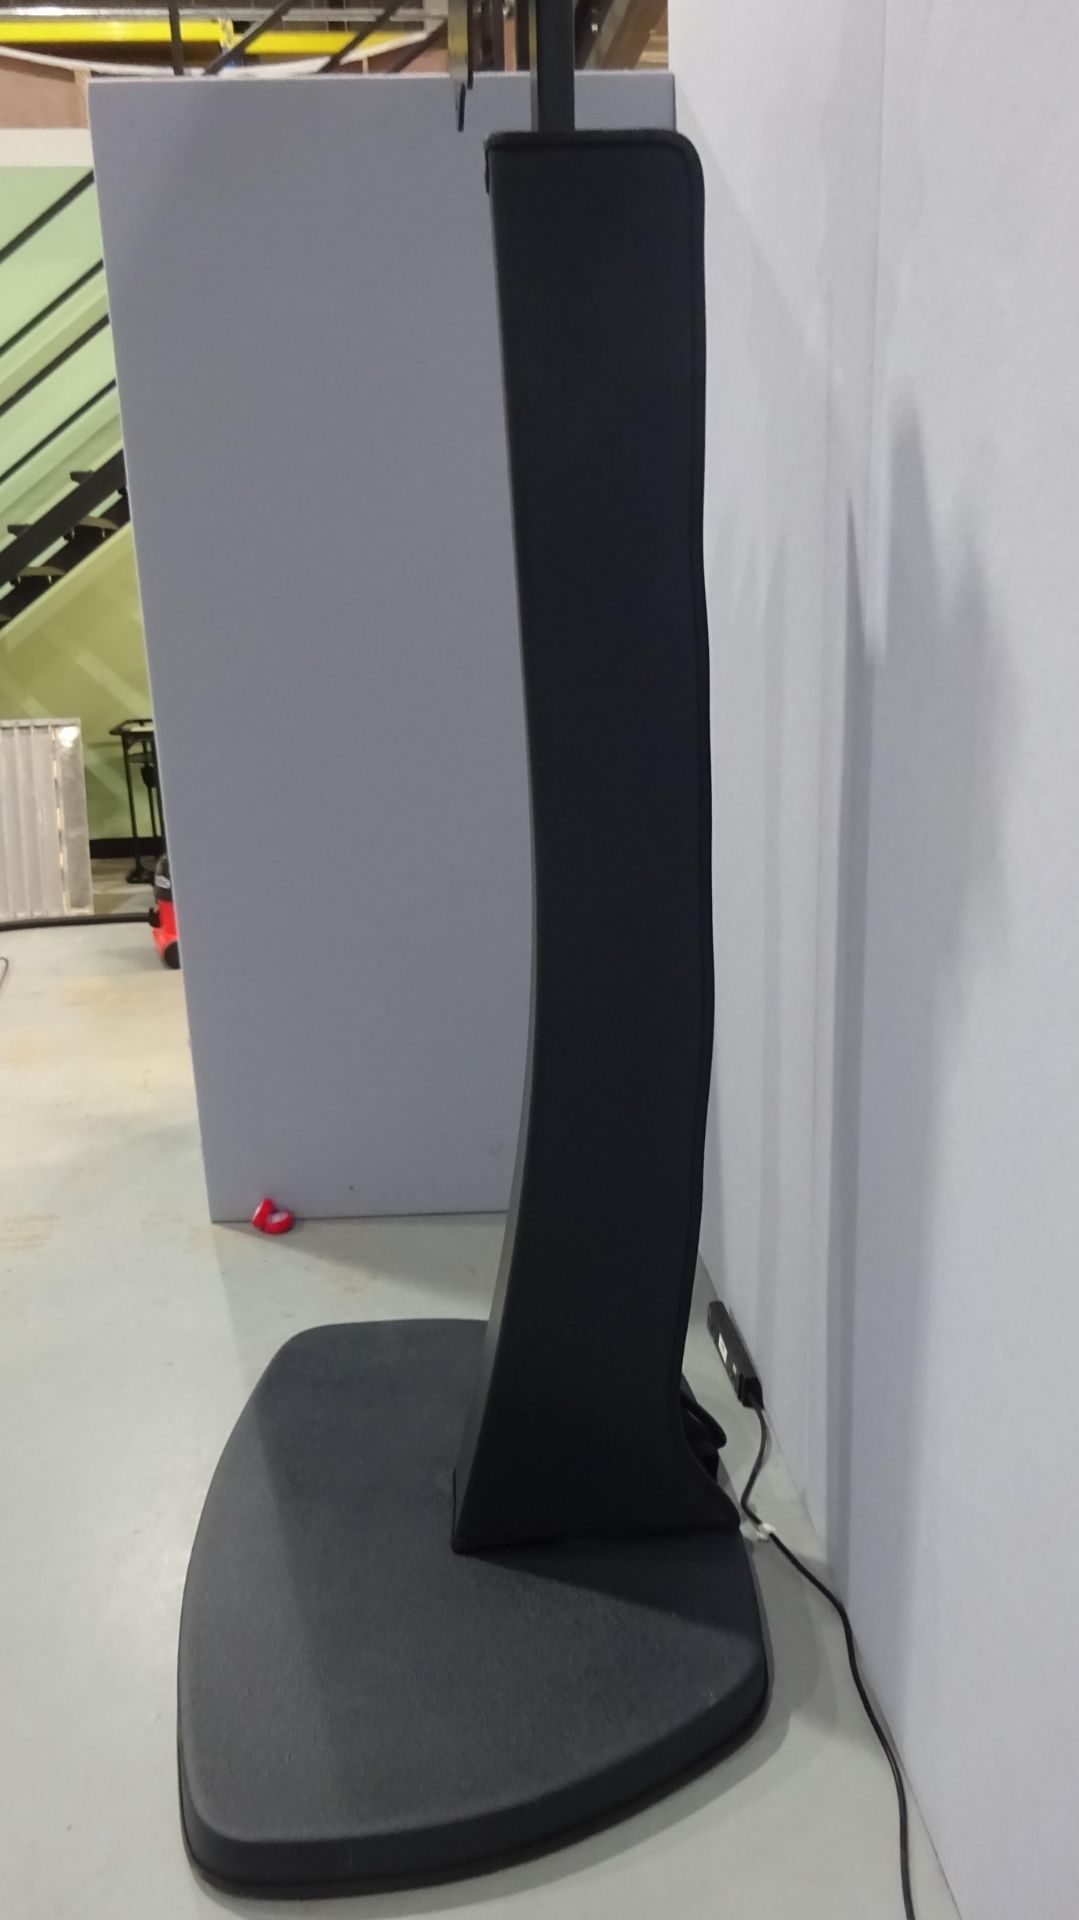 Heavy Duty Stand for 75" Plasma Screens "A Screen Stalk" Giant display lift ONLY USED ONCE Serial No - Image 2 of 6